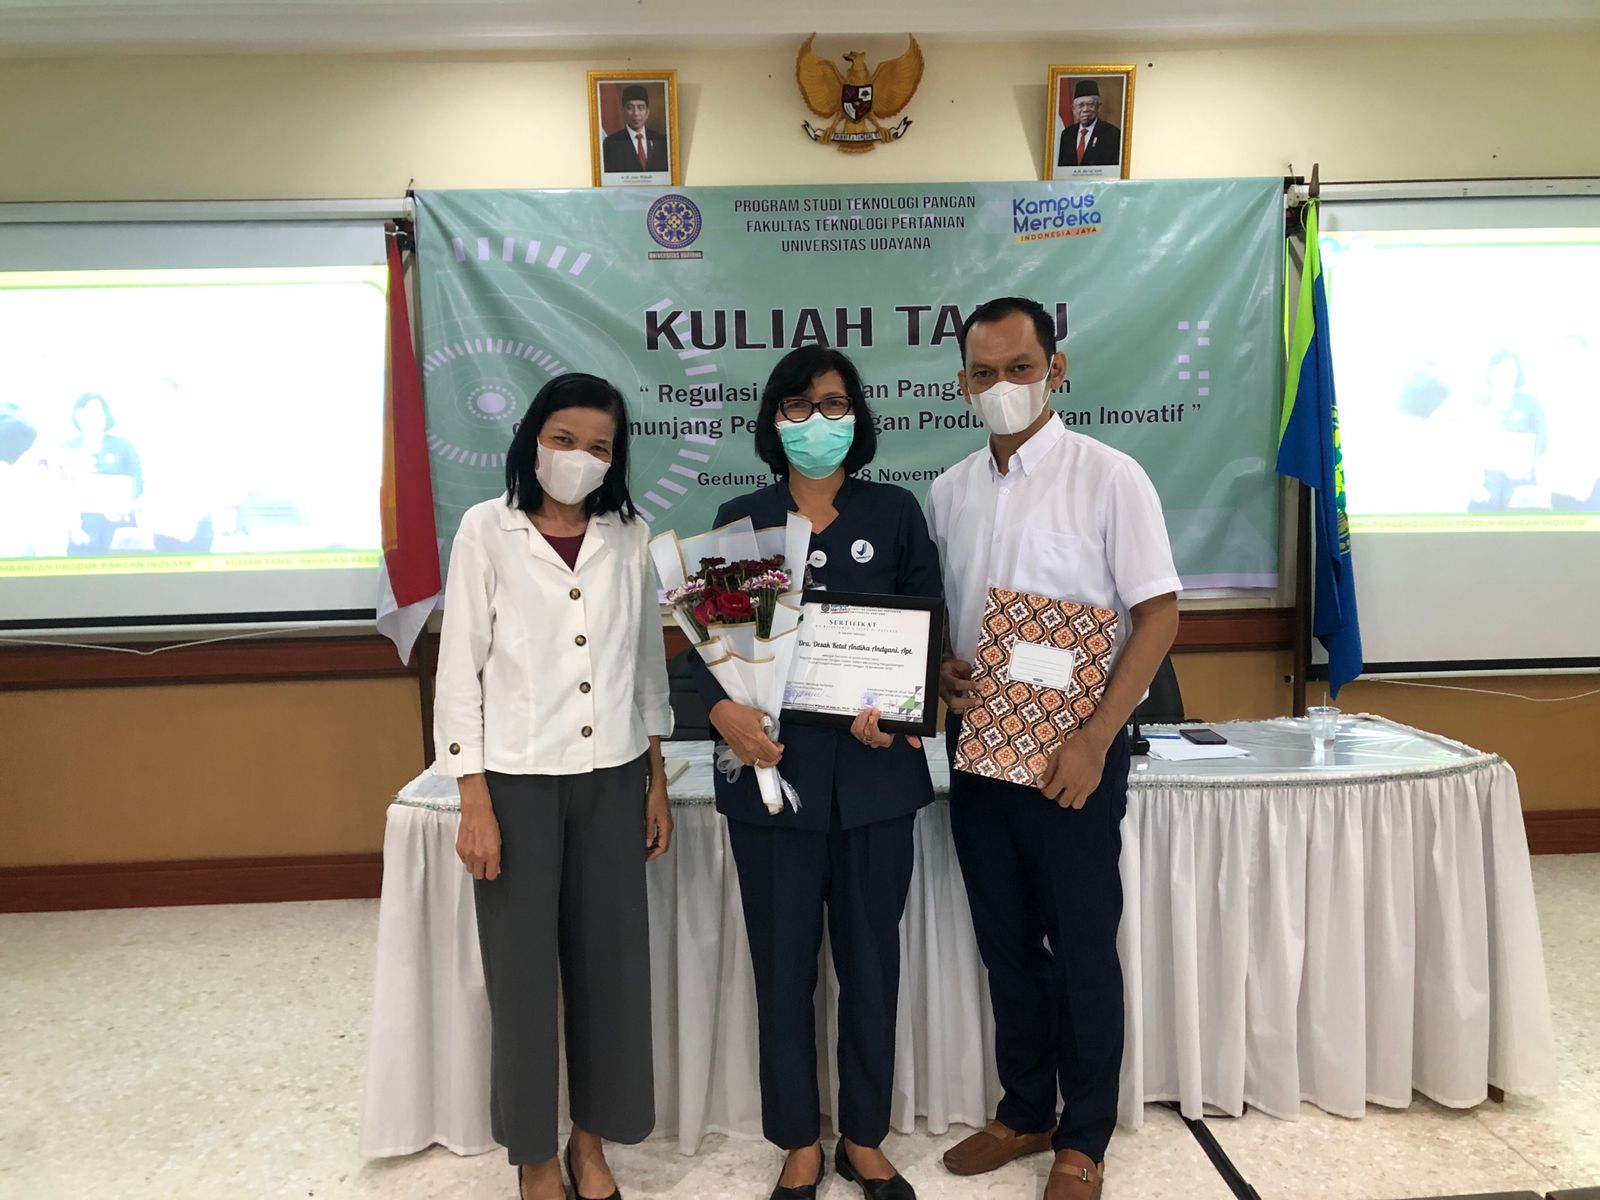 Collaborating with BBPOM in Denpasar, Food Technology Study Program Holds Guest Lecture on Processed Food Safety Regulations